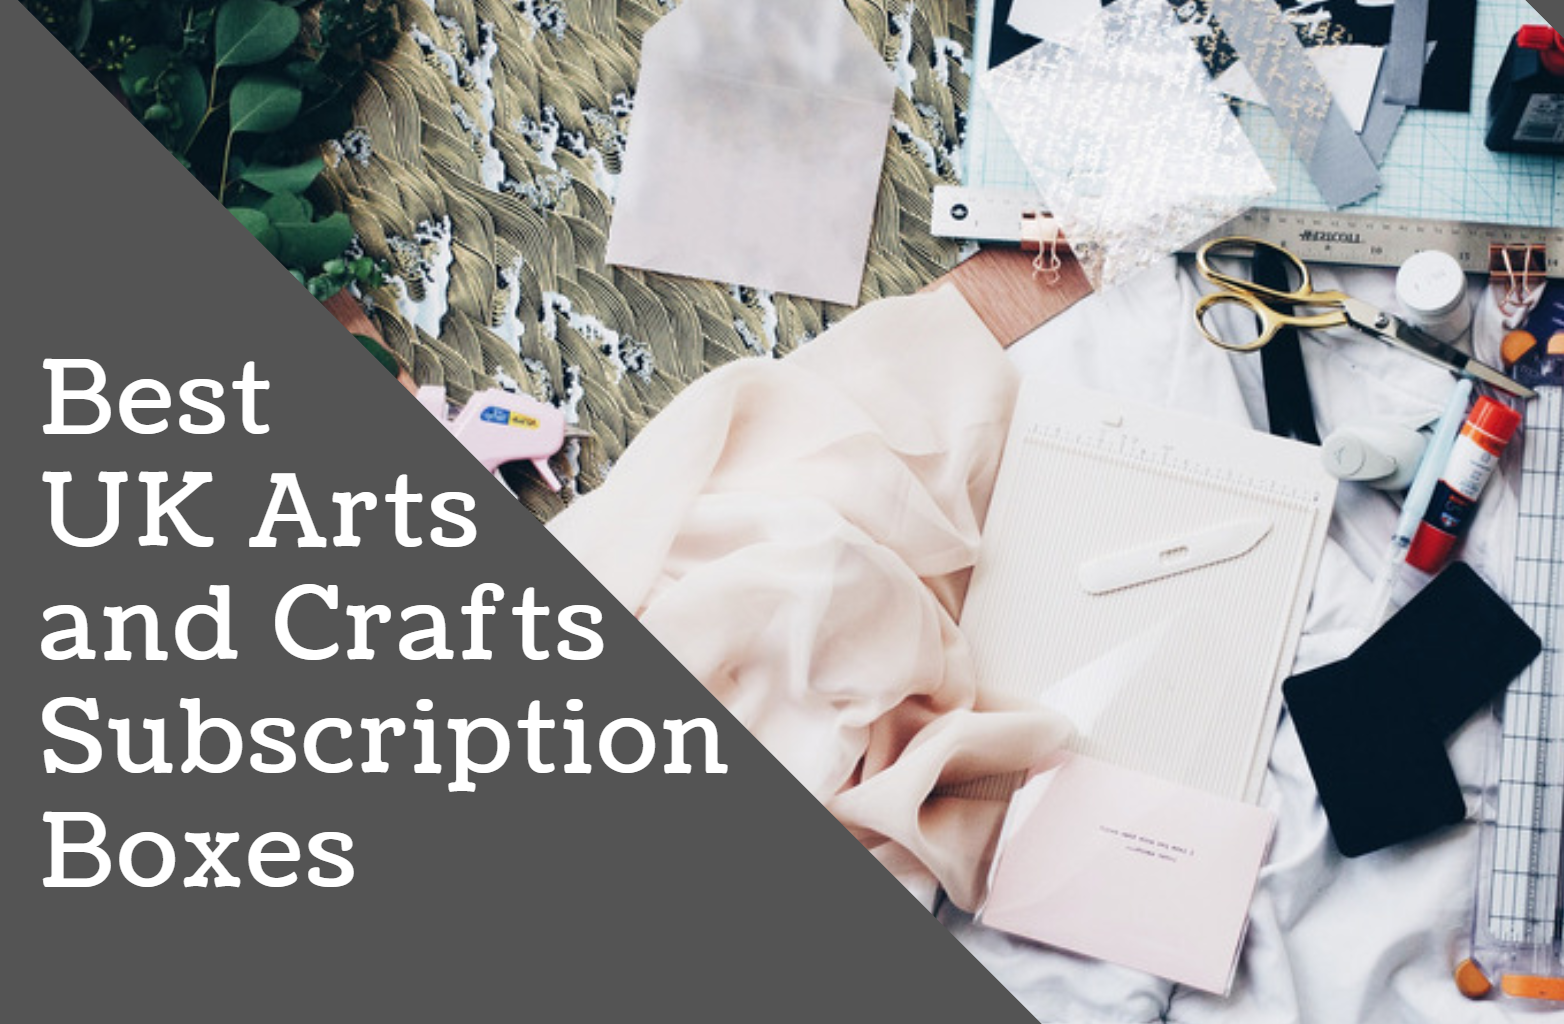 The Best UK Arts and Crafts Subscription Boxes